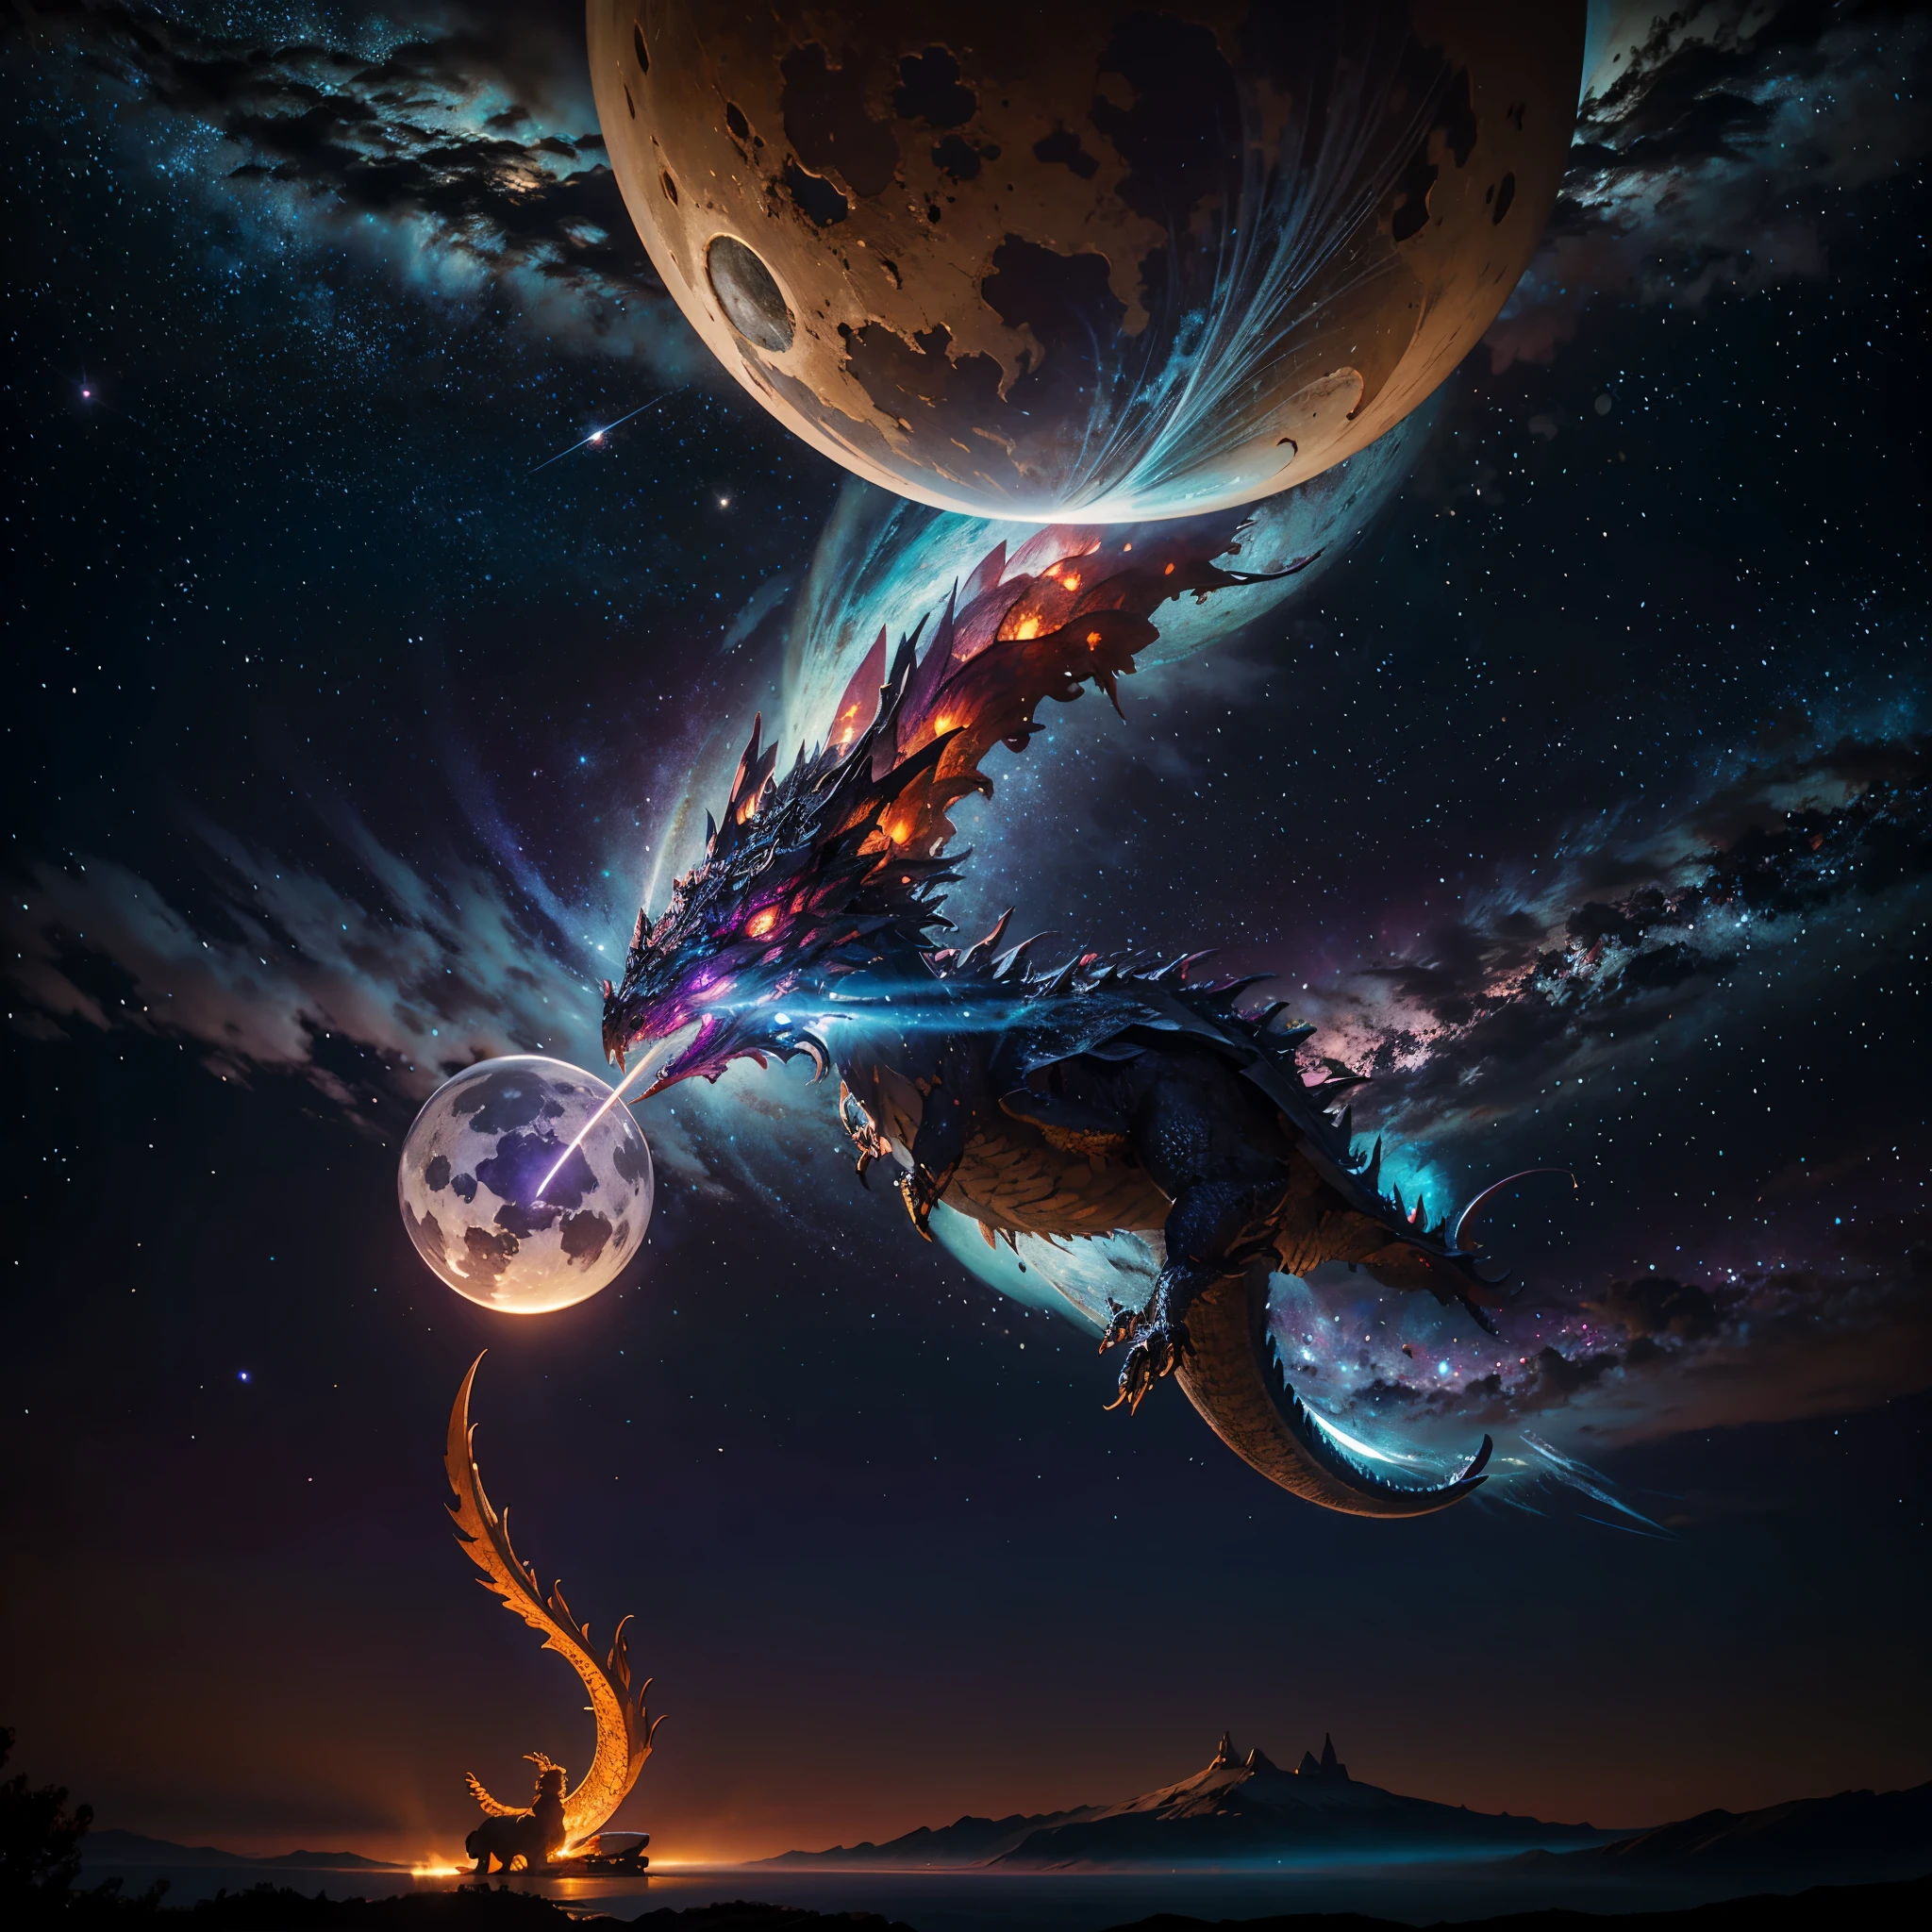 Totem ShootingStar The dragon sleeps in the forest, curled up in a kolachik,lying on its belly, The head lies on the snow nebulae hyper Nebula Moonrise epic moonset panoramic moonshine "Wood Dragon Totem" Unrealengine5 ultra masterpiece meticulously intricate ultra_high-details ultra_high-def ultra_high-res ultra_high-quality optimal ultra_sharpness ultra_photo-realistic ethereal_beauty fantasy_illustration:1.3 enchanting_gaze otherworldly_charm mystical_sky deep path equirectangular moonlit_night detailed_cloudscape:1.3 batlying_in_the_sky_background bat thong beholder legs_dangling_above_lava glowing_torches long_leges cgi vfx sfx reflex Octane_rendered extreme improved UHD focus XT3 accurate DSLR HDR romm rgb pbr 3dcg fxaa blay vivid colors-coded anti-aliasing fkaa txaa rtx ssao opengl-shaders glsl-shaders post-processing post-production cell-shading tone-mapping perfection volumetric Lightning contrast Cinematic moonlight backlight global illumination sunflower luminescence Crystalline invoke magic monarch monstrous viceroy creature sundrop onyx summon transparent ruby Tourmaline crystal pearls paddling opal fleuraison monster butterfly "WoodDragon" reflection strange glow lazuli hole flash Earth saturate hearth blooms floraison varies multi etc. --s 1000 --c 20 --q 20 --chaos 100